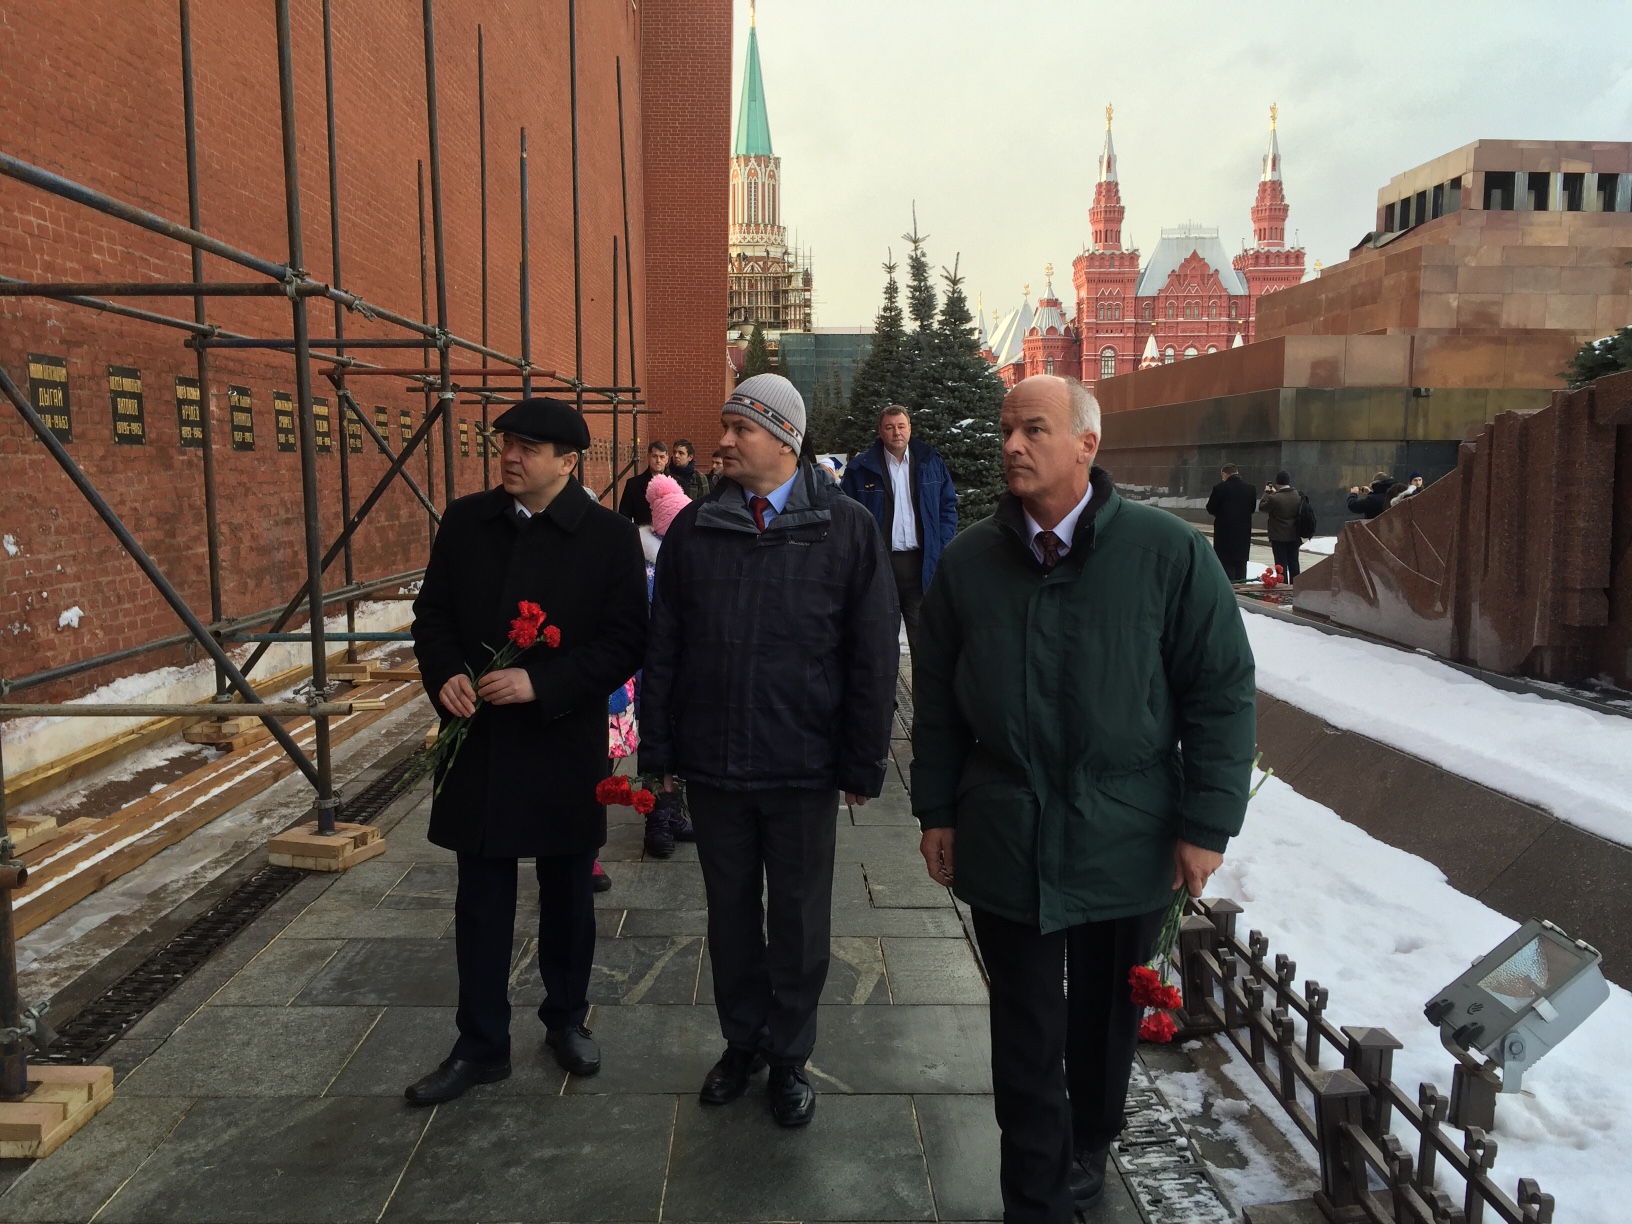 NASA astronaut Jeff Williams, right, along with Russian Cosmonauts Oleg Skripochka, left, and Alexey Ovchnin prepare for a ceremonial laying of flowers at the graves of Yuri Gagarin and Sergey Korolev outside the Kremlin near Red Square in Moscow on Friday, Feb. 26, 2016. (Jonathan D. Woods/TIME)